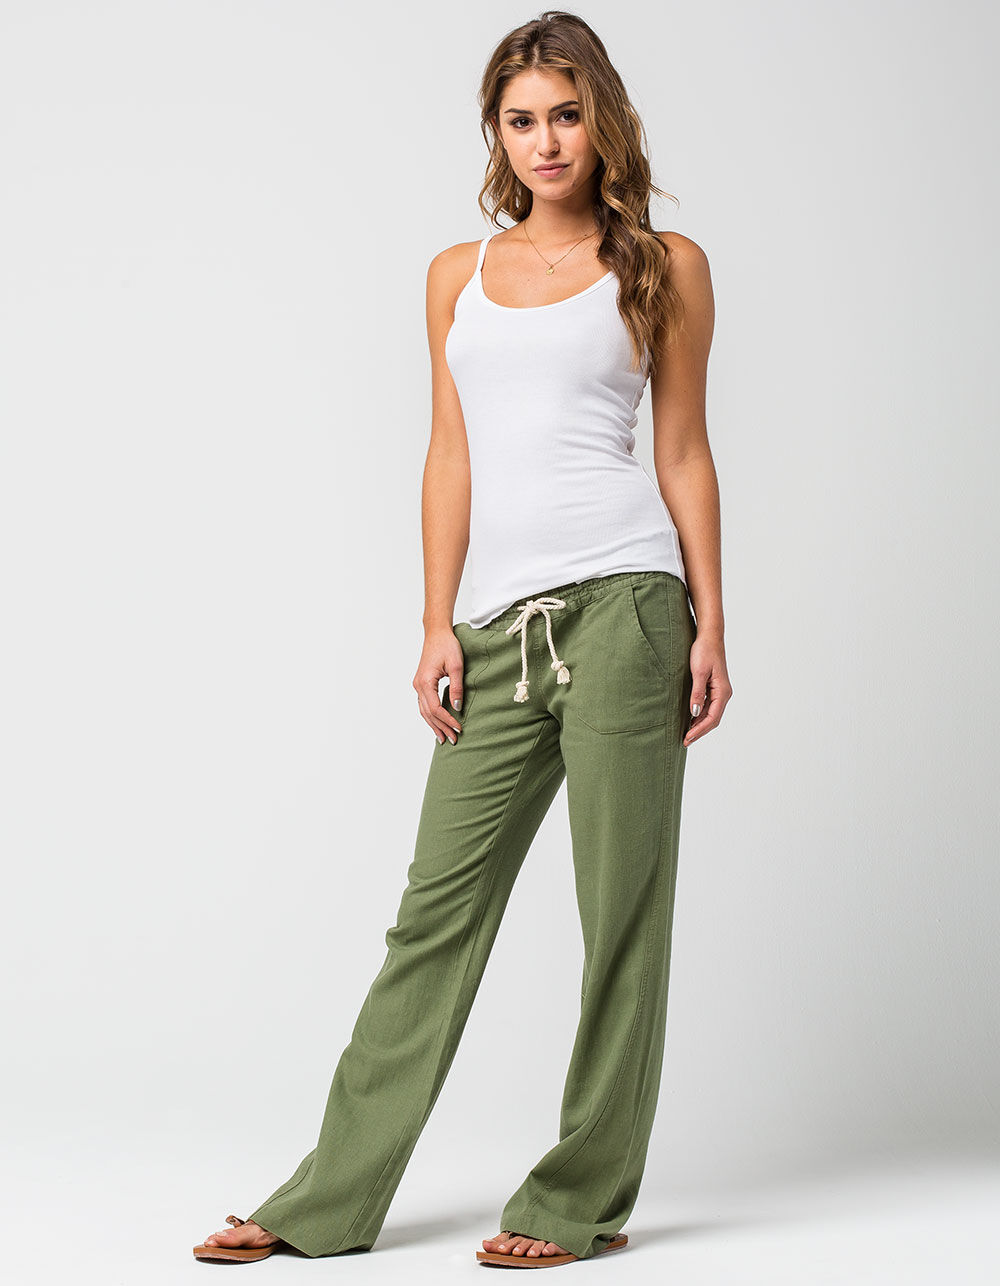 Roxy Womens Oceanside Pant - 42nd Street Clothing